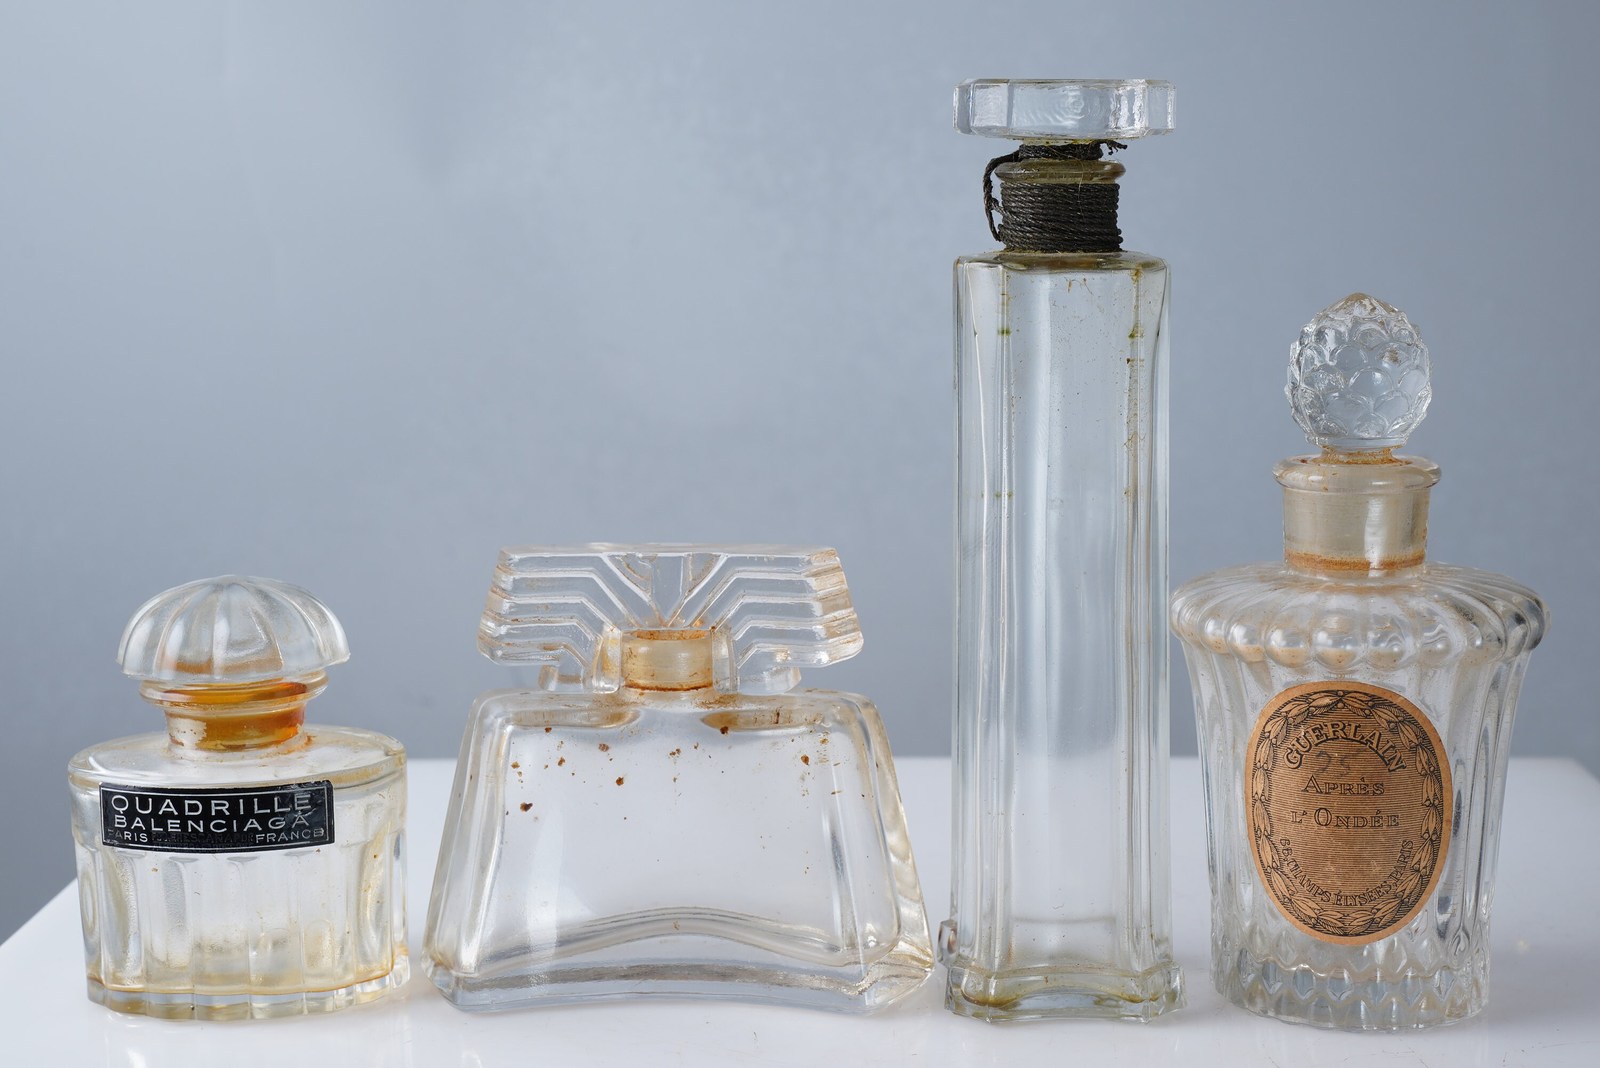 c1940 French Baccarat Perfume Bottle Collection - $252.45